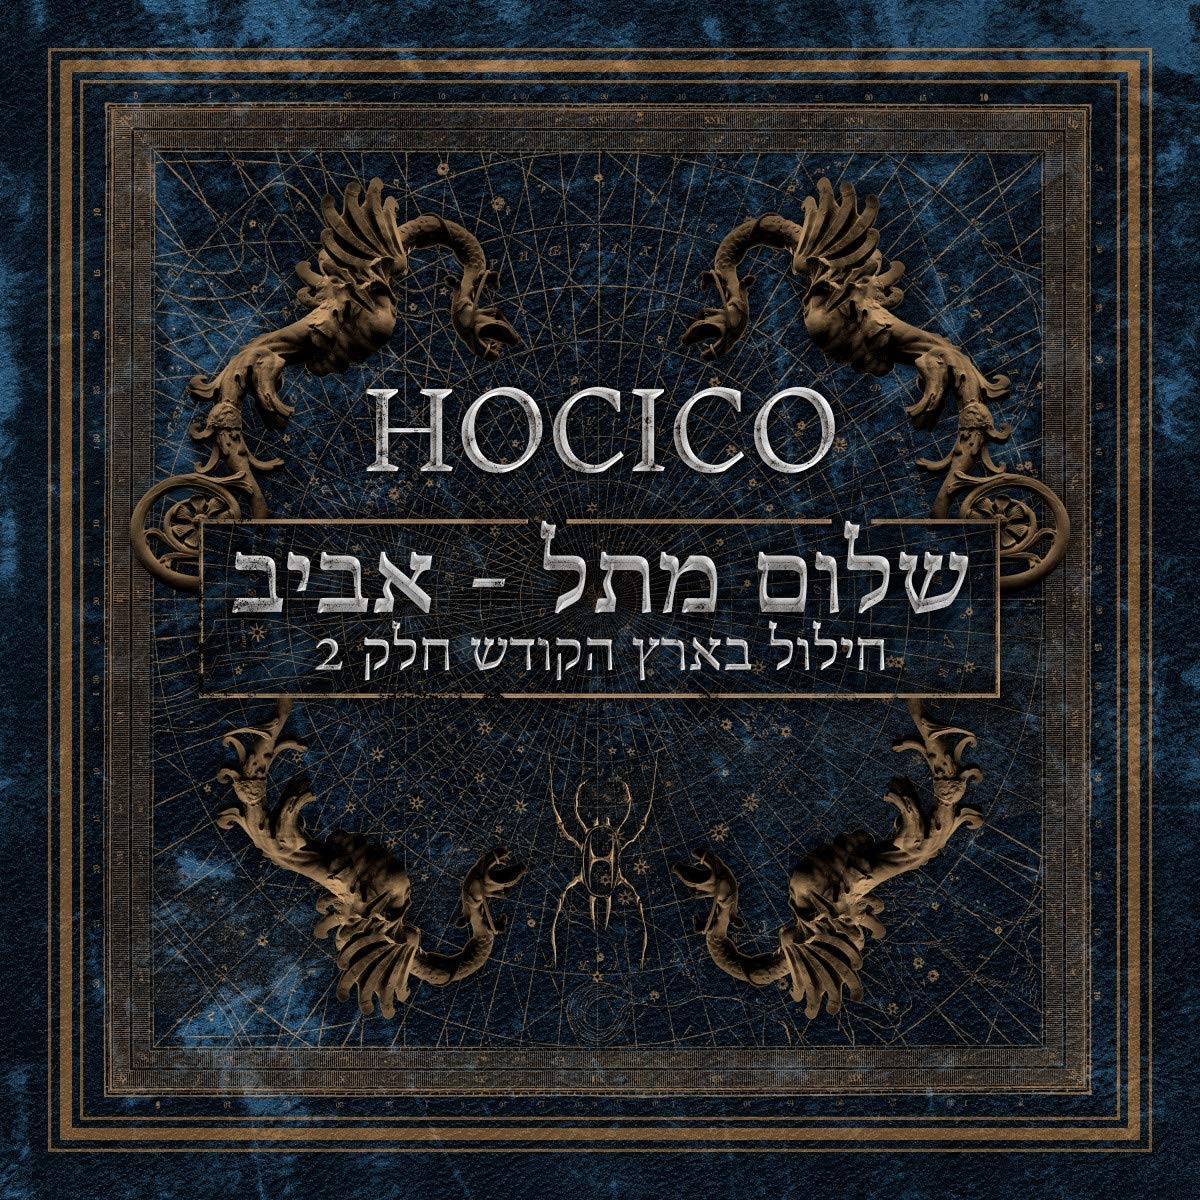 HOCICO (Mex) – Shalom From Hell Aviv- Blasphemies In The Holy Land 2